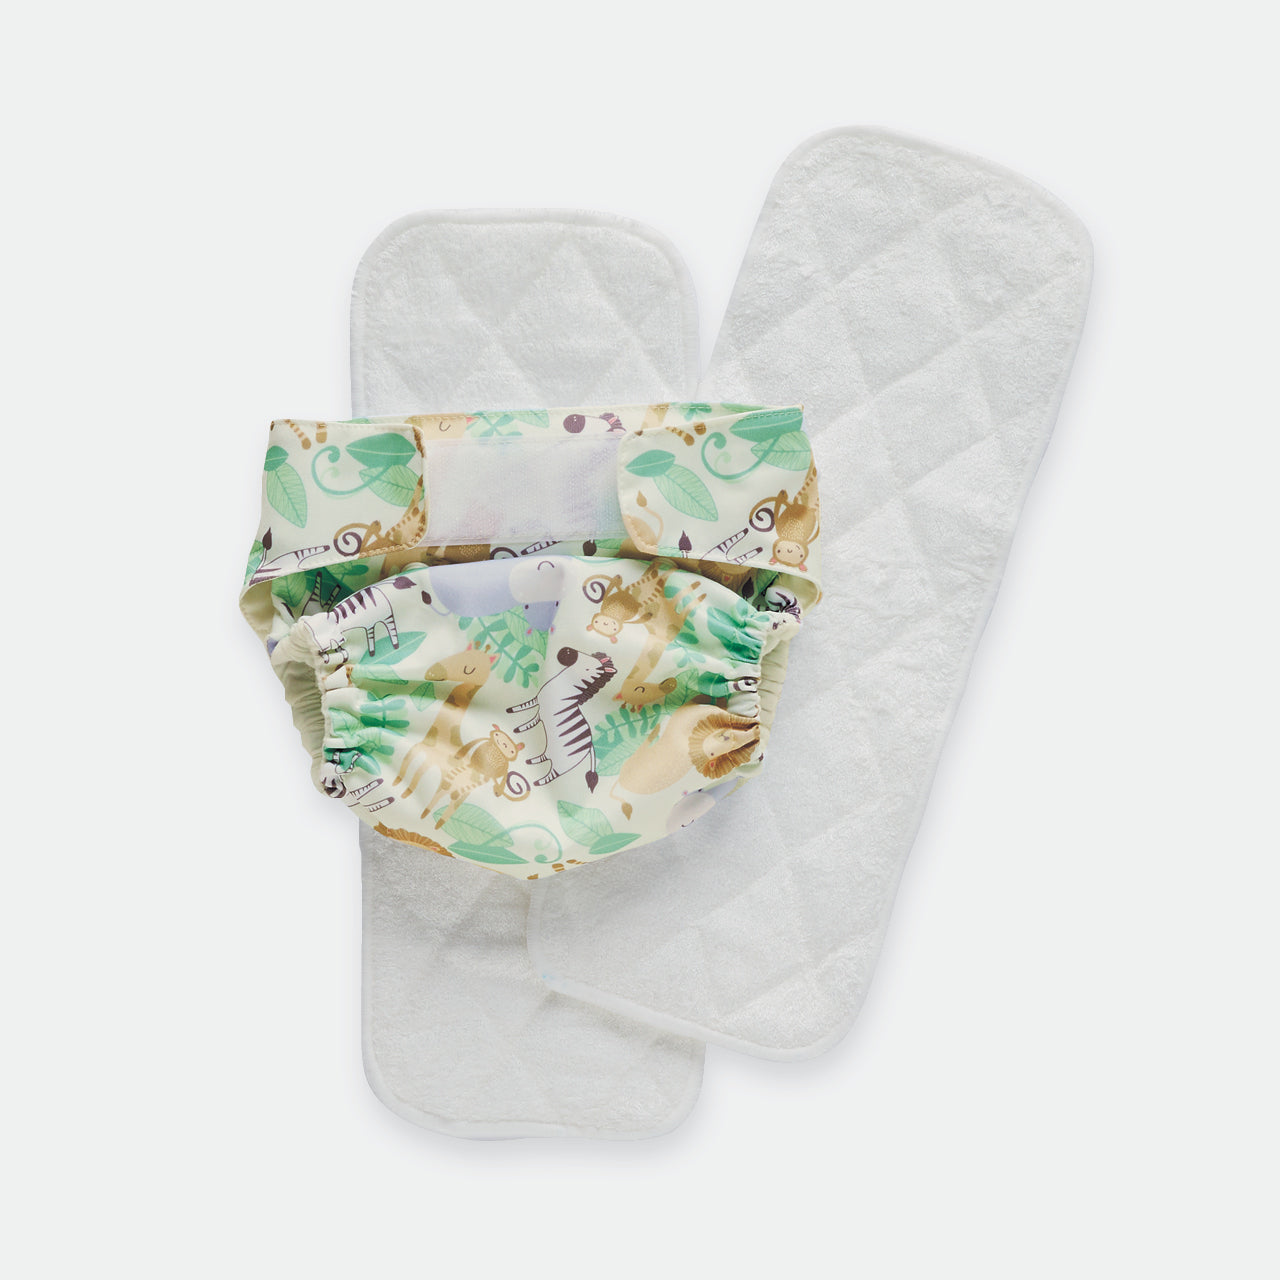 Safari Reusable Nappy and liners on white background